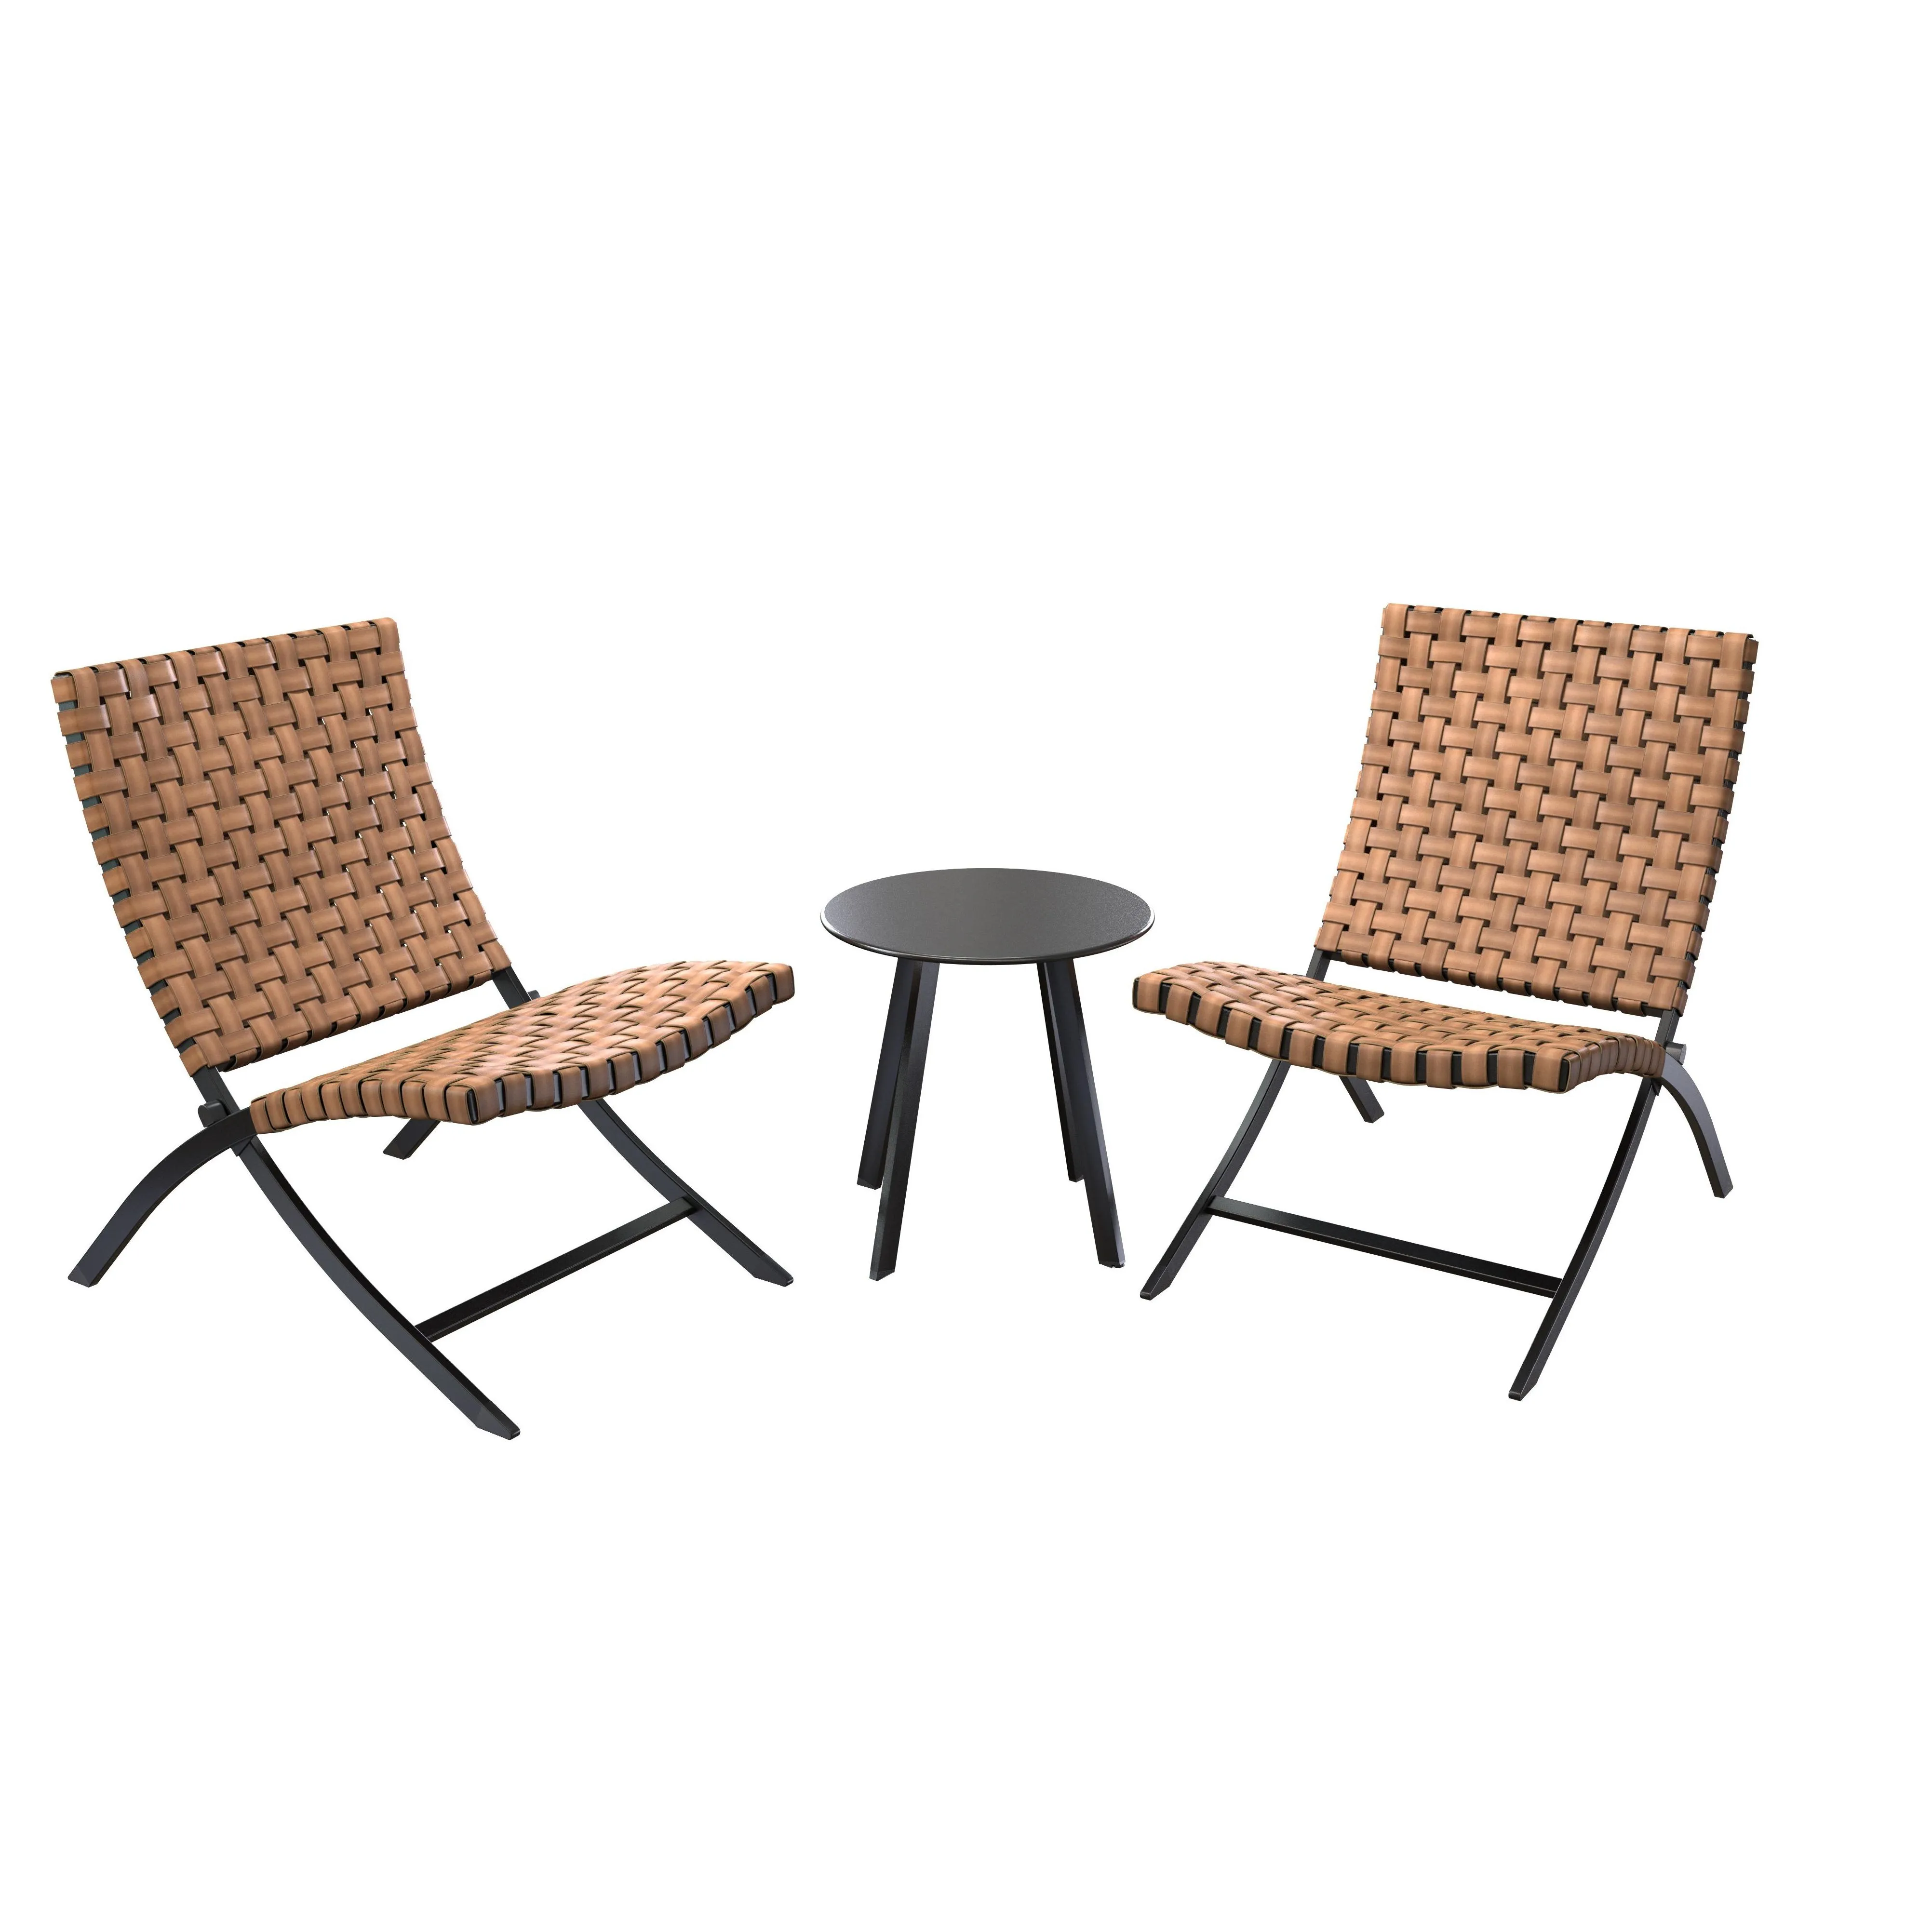 3 piece rattan patio set furniture foldable wicker lounger chairs and coffee table set,natural brown